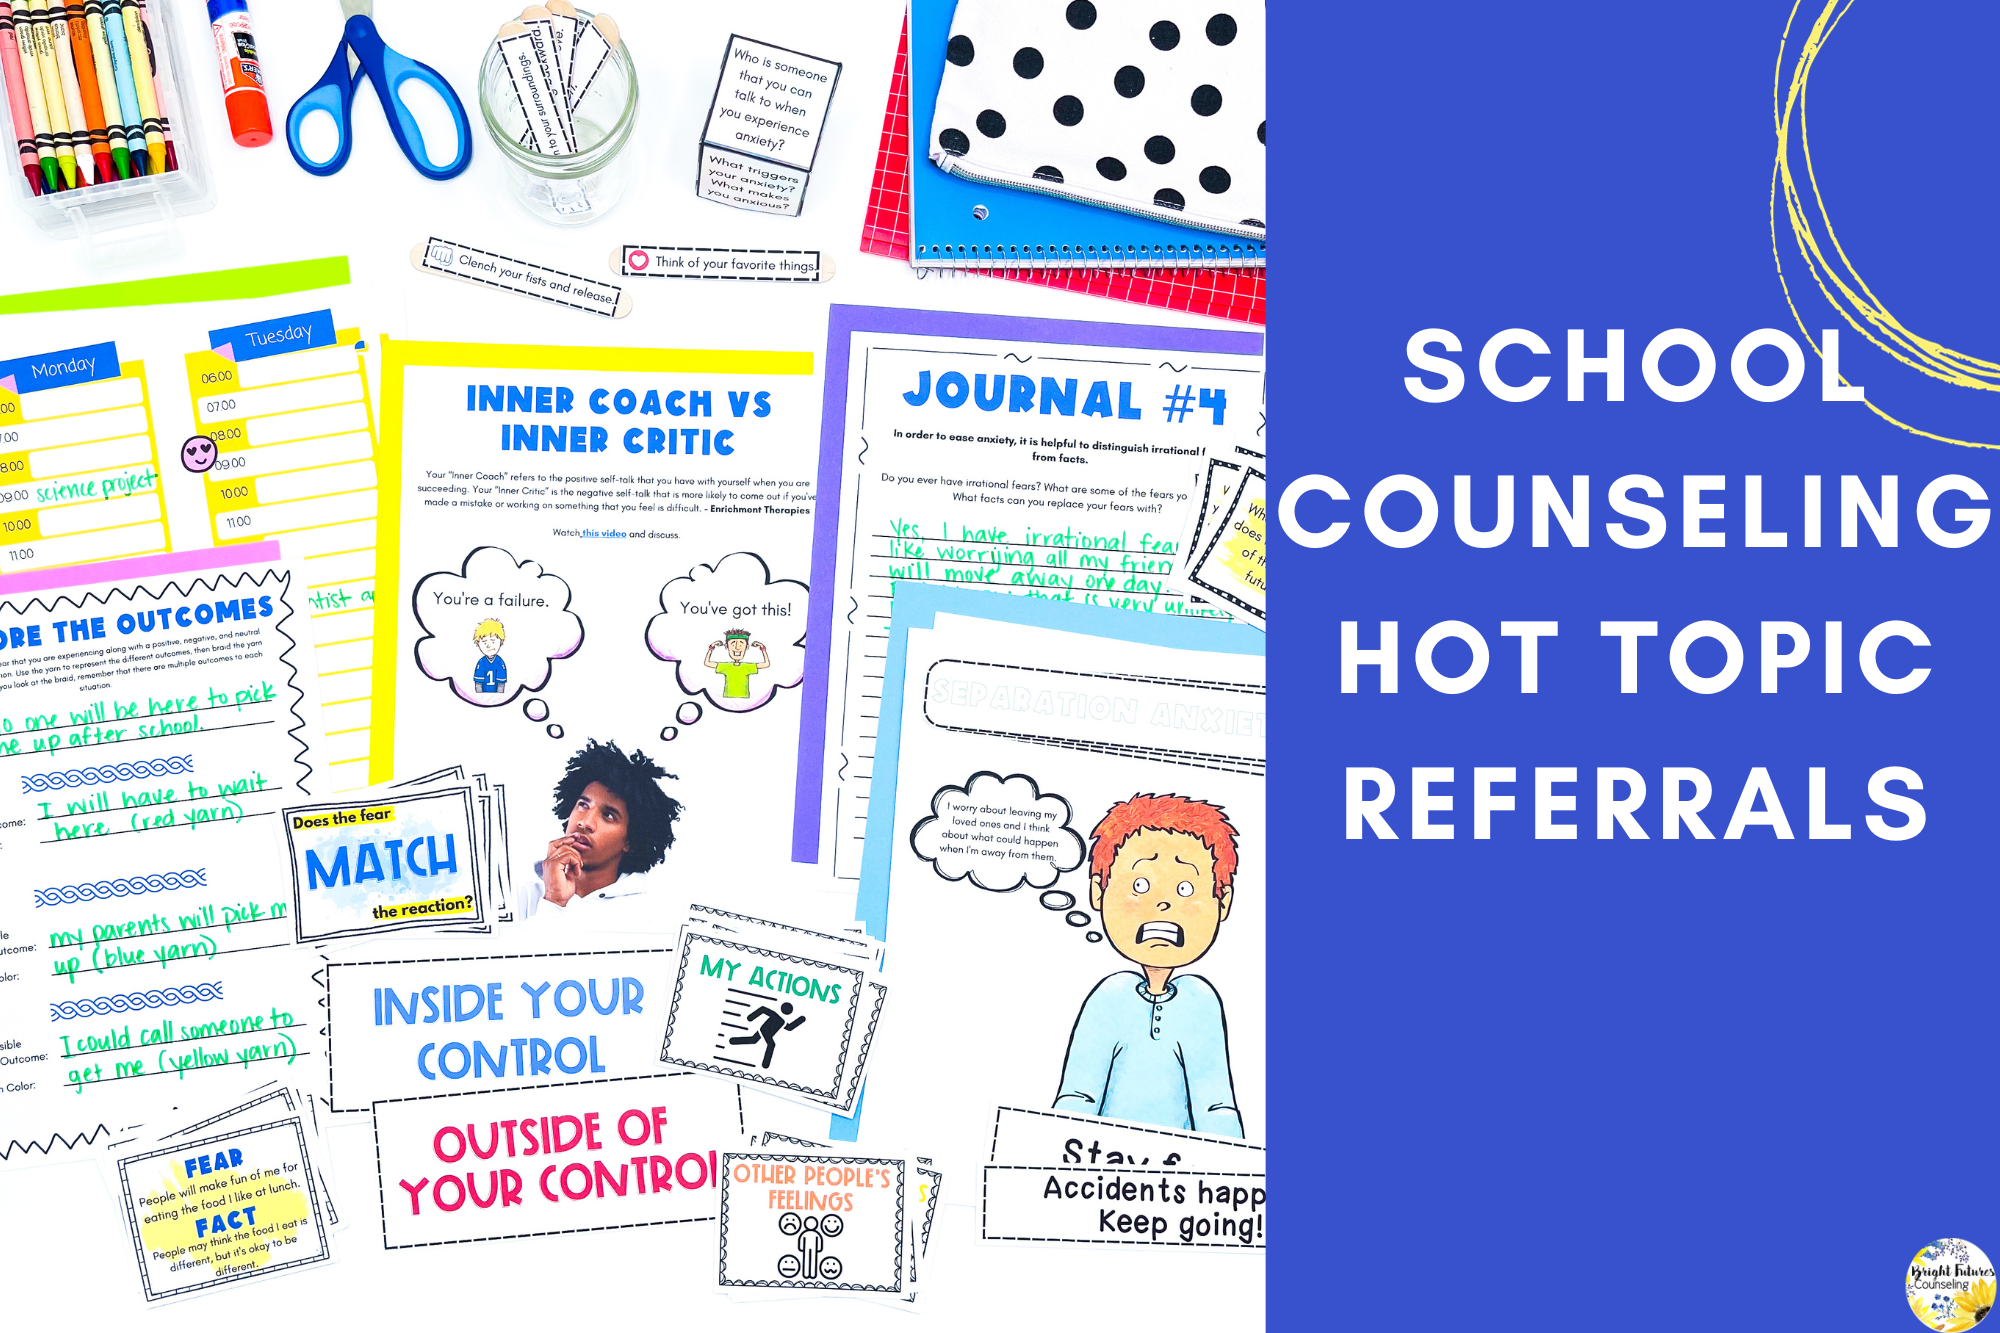 School Counseling Hot Topic Referrals